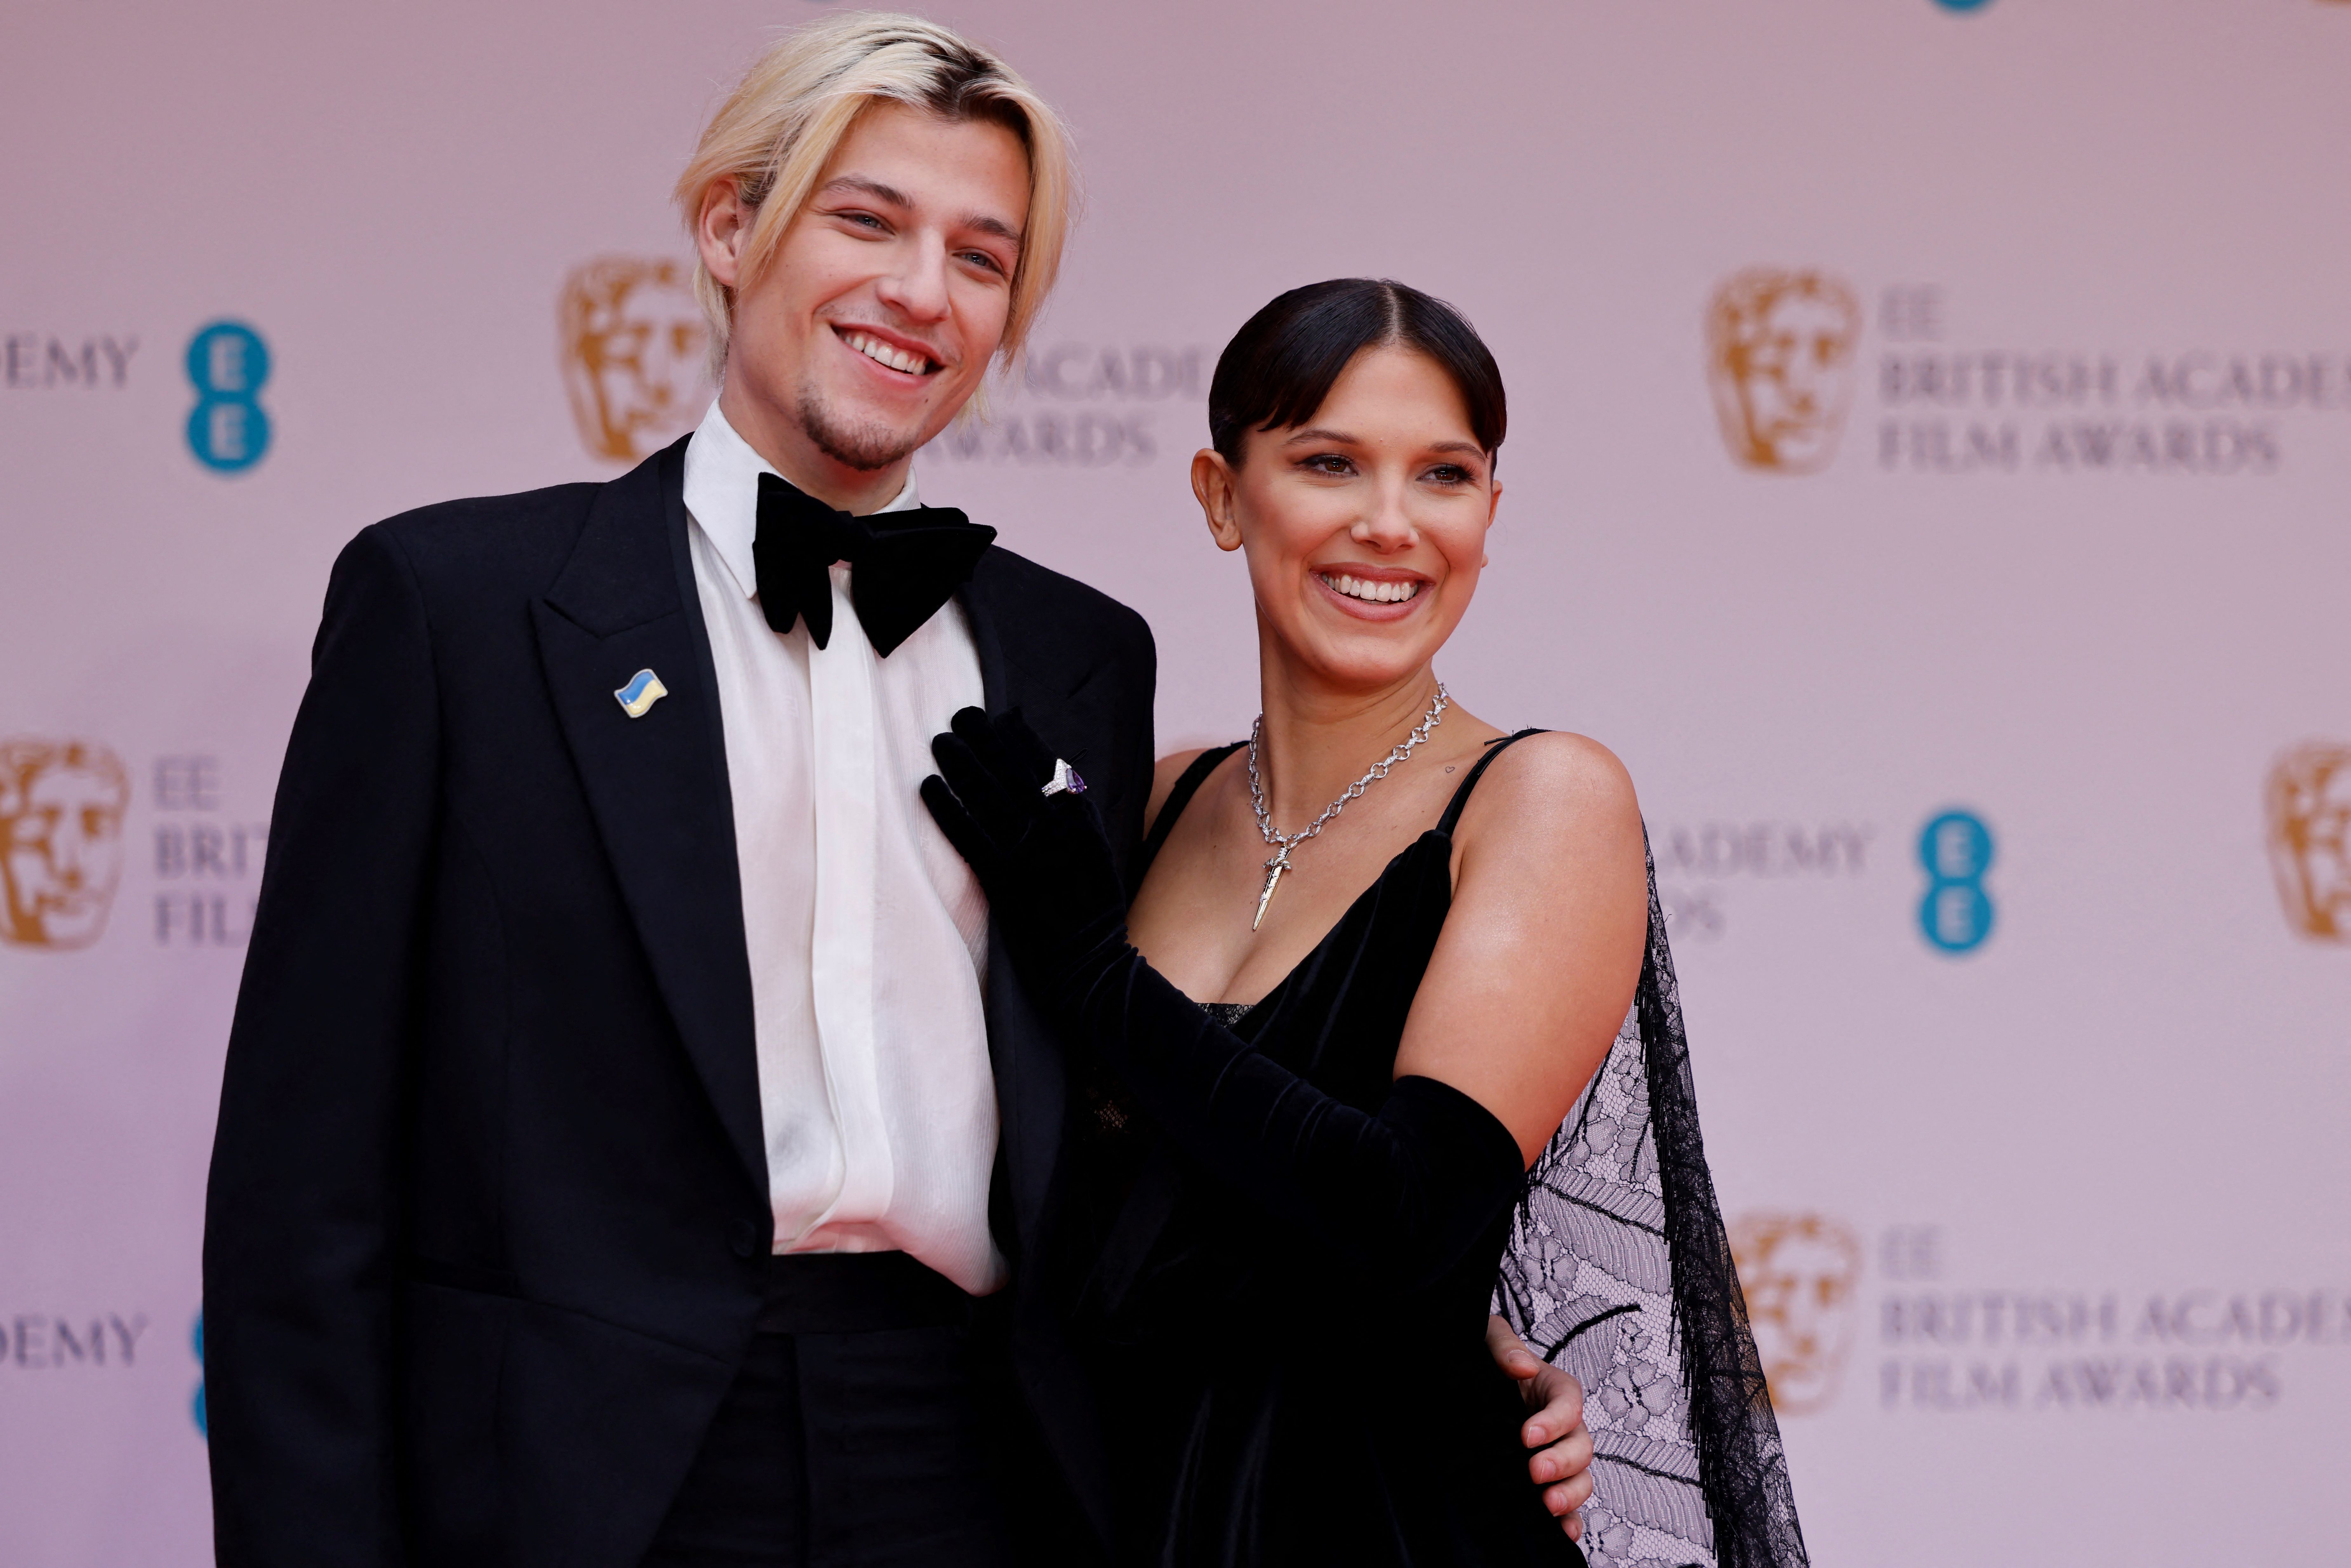 Millie Bobby Brown Goes Red Carpet Official With Jake Bongiovi At 2022  BAFTAs